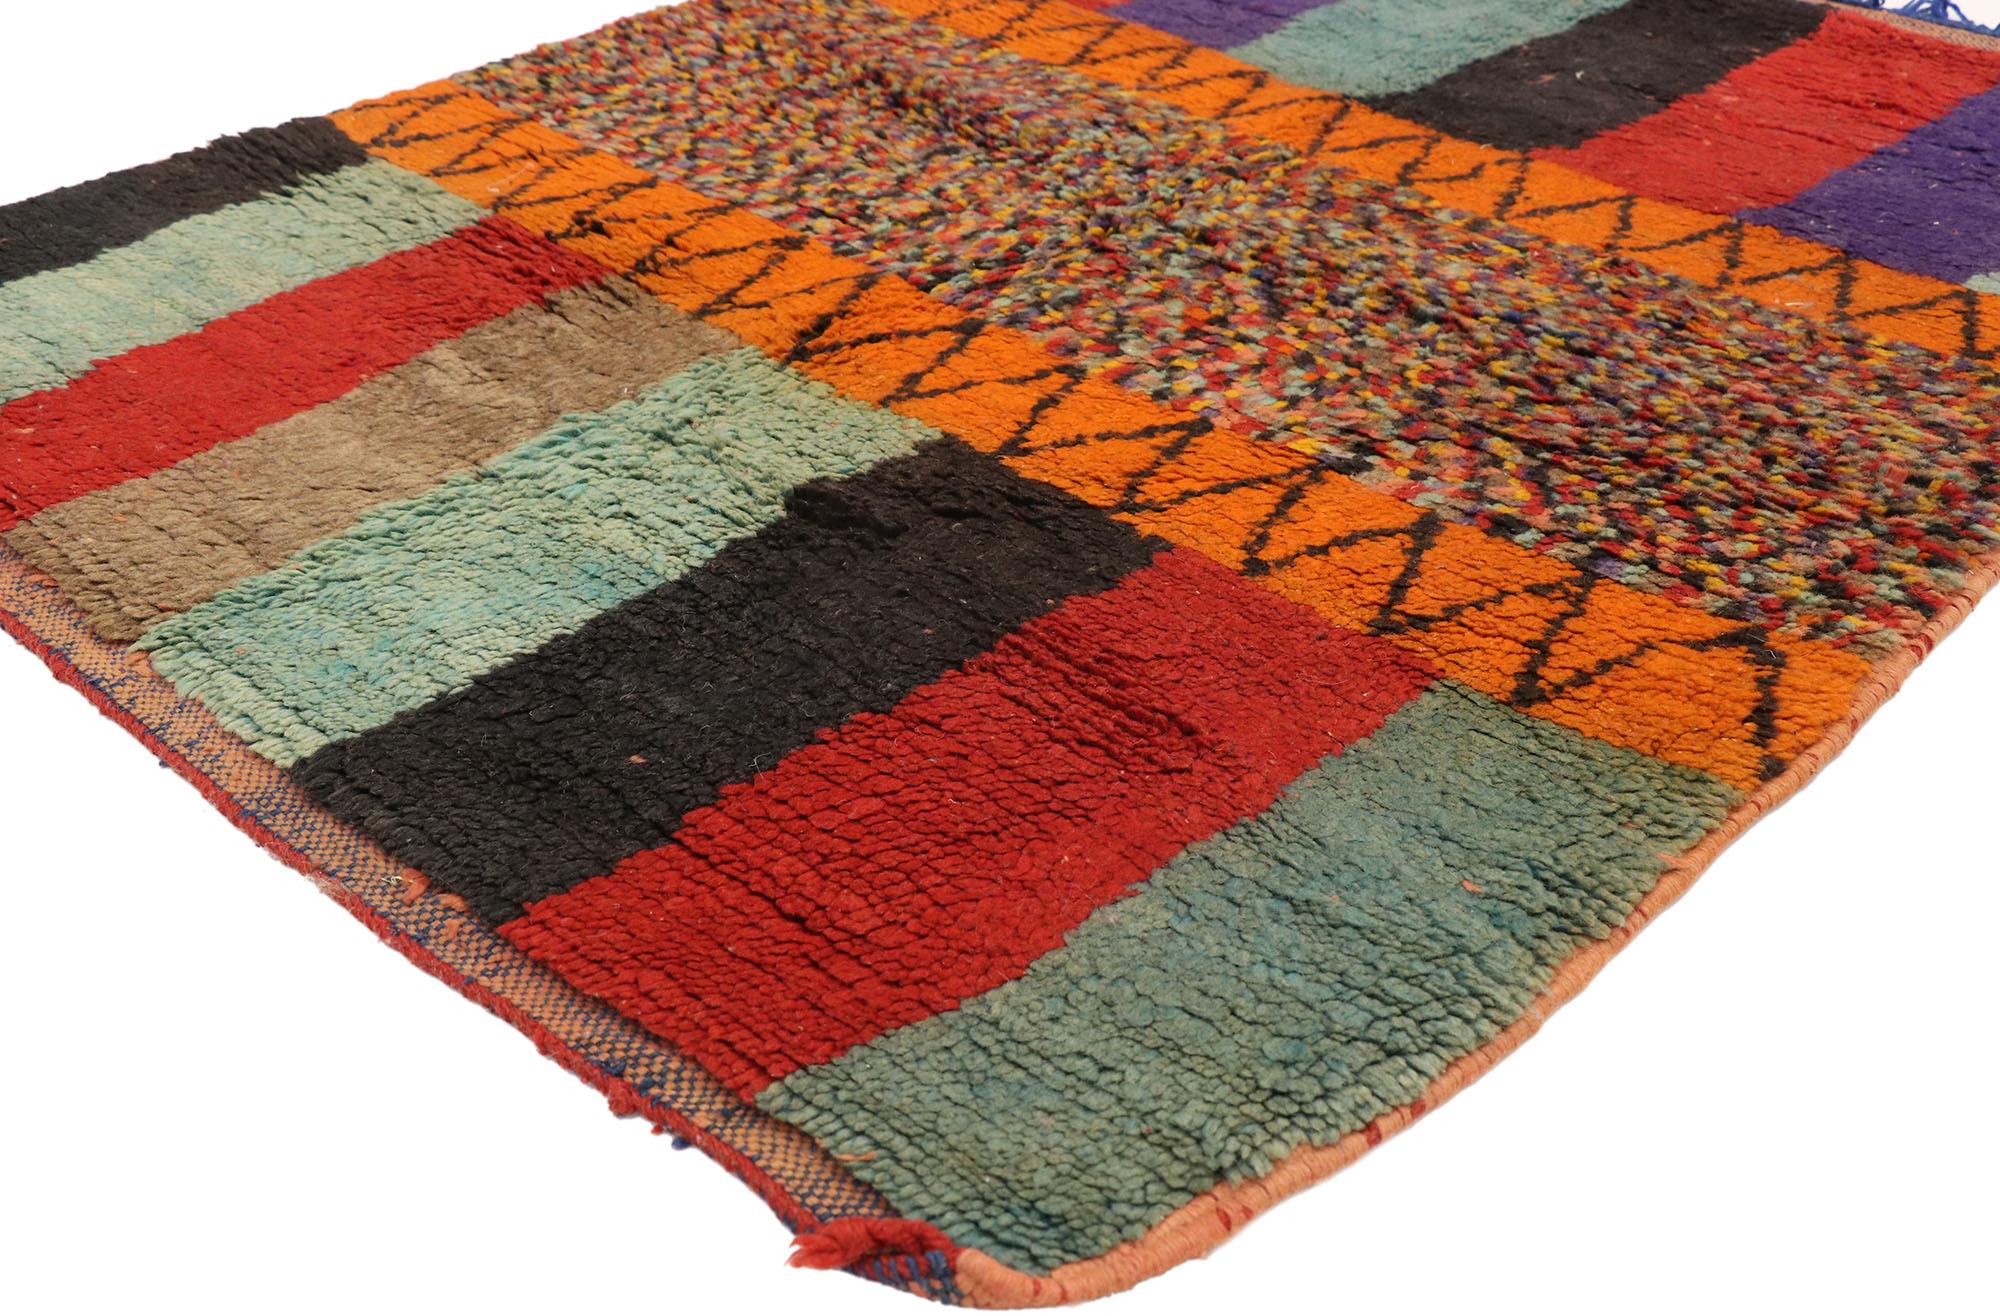 21066, vintage Berber Rehamna Moroccan rug with color block pattern and Cubist style. Drawing inspiration from Paul Klee, Sonia Delaunay, and Theo van Doesburg, this hand knotted wool new contemporary Berber Moroccan rug beautifully embodies Cubist